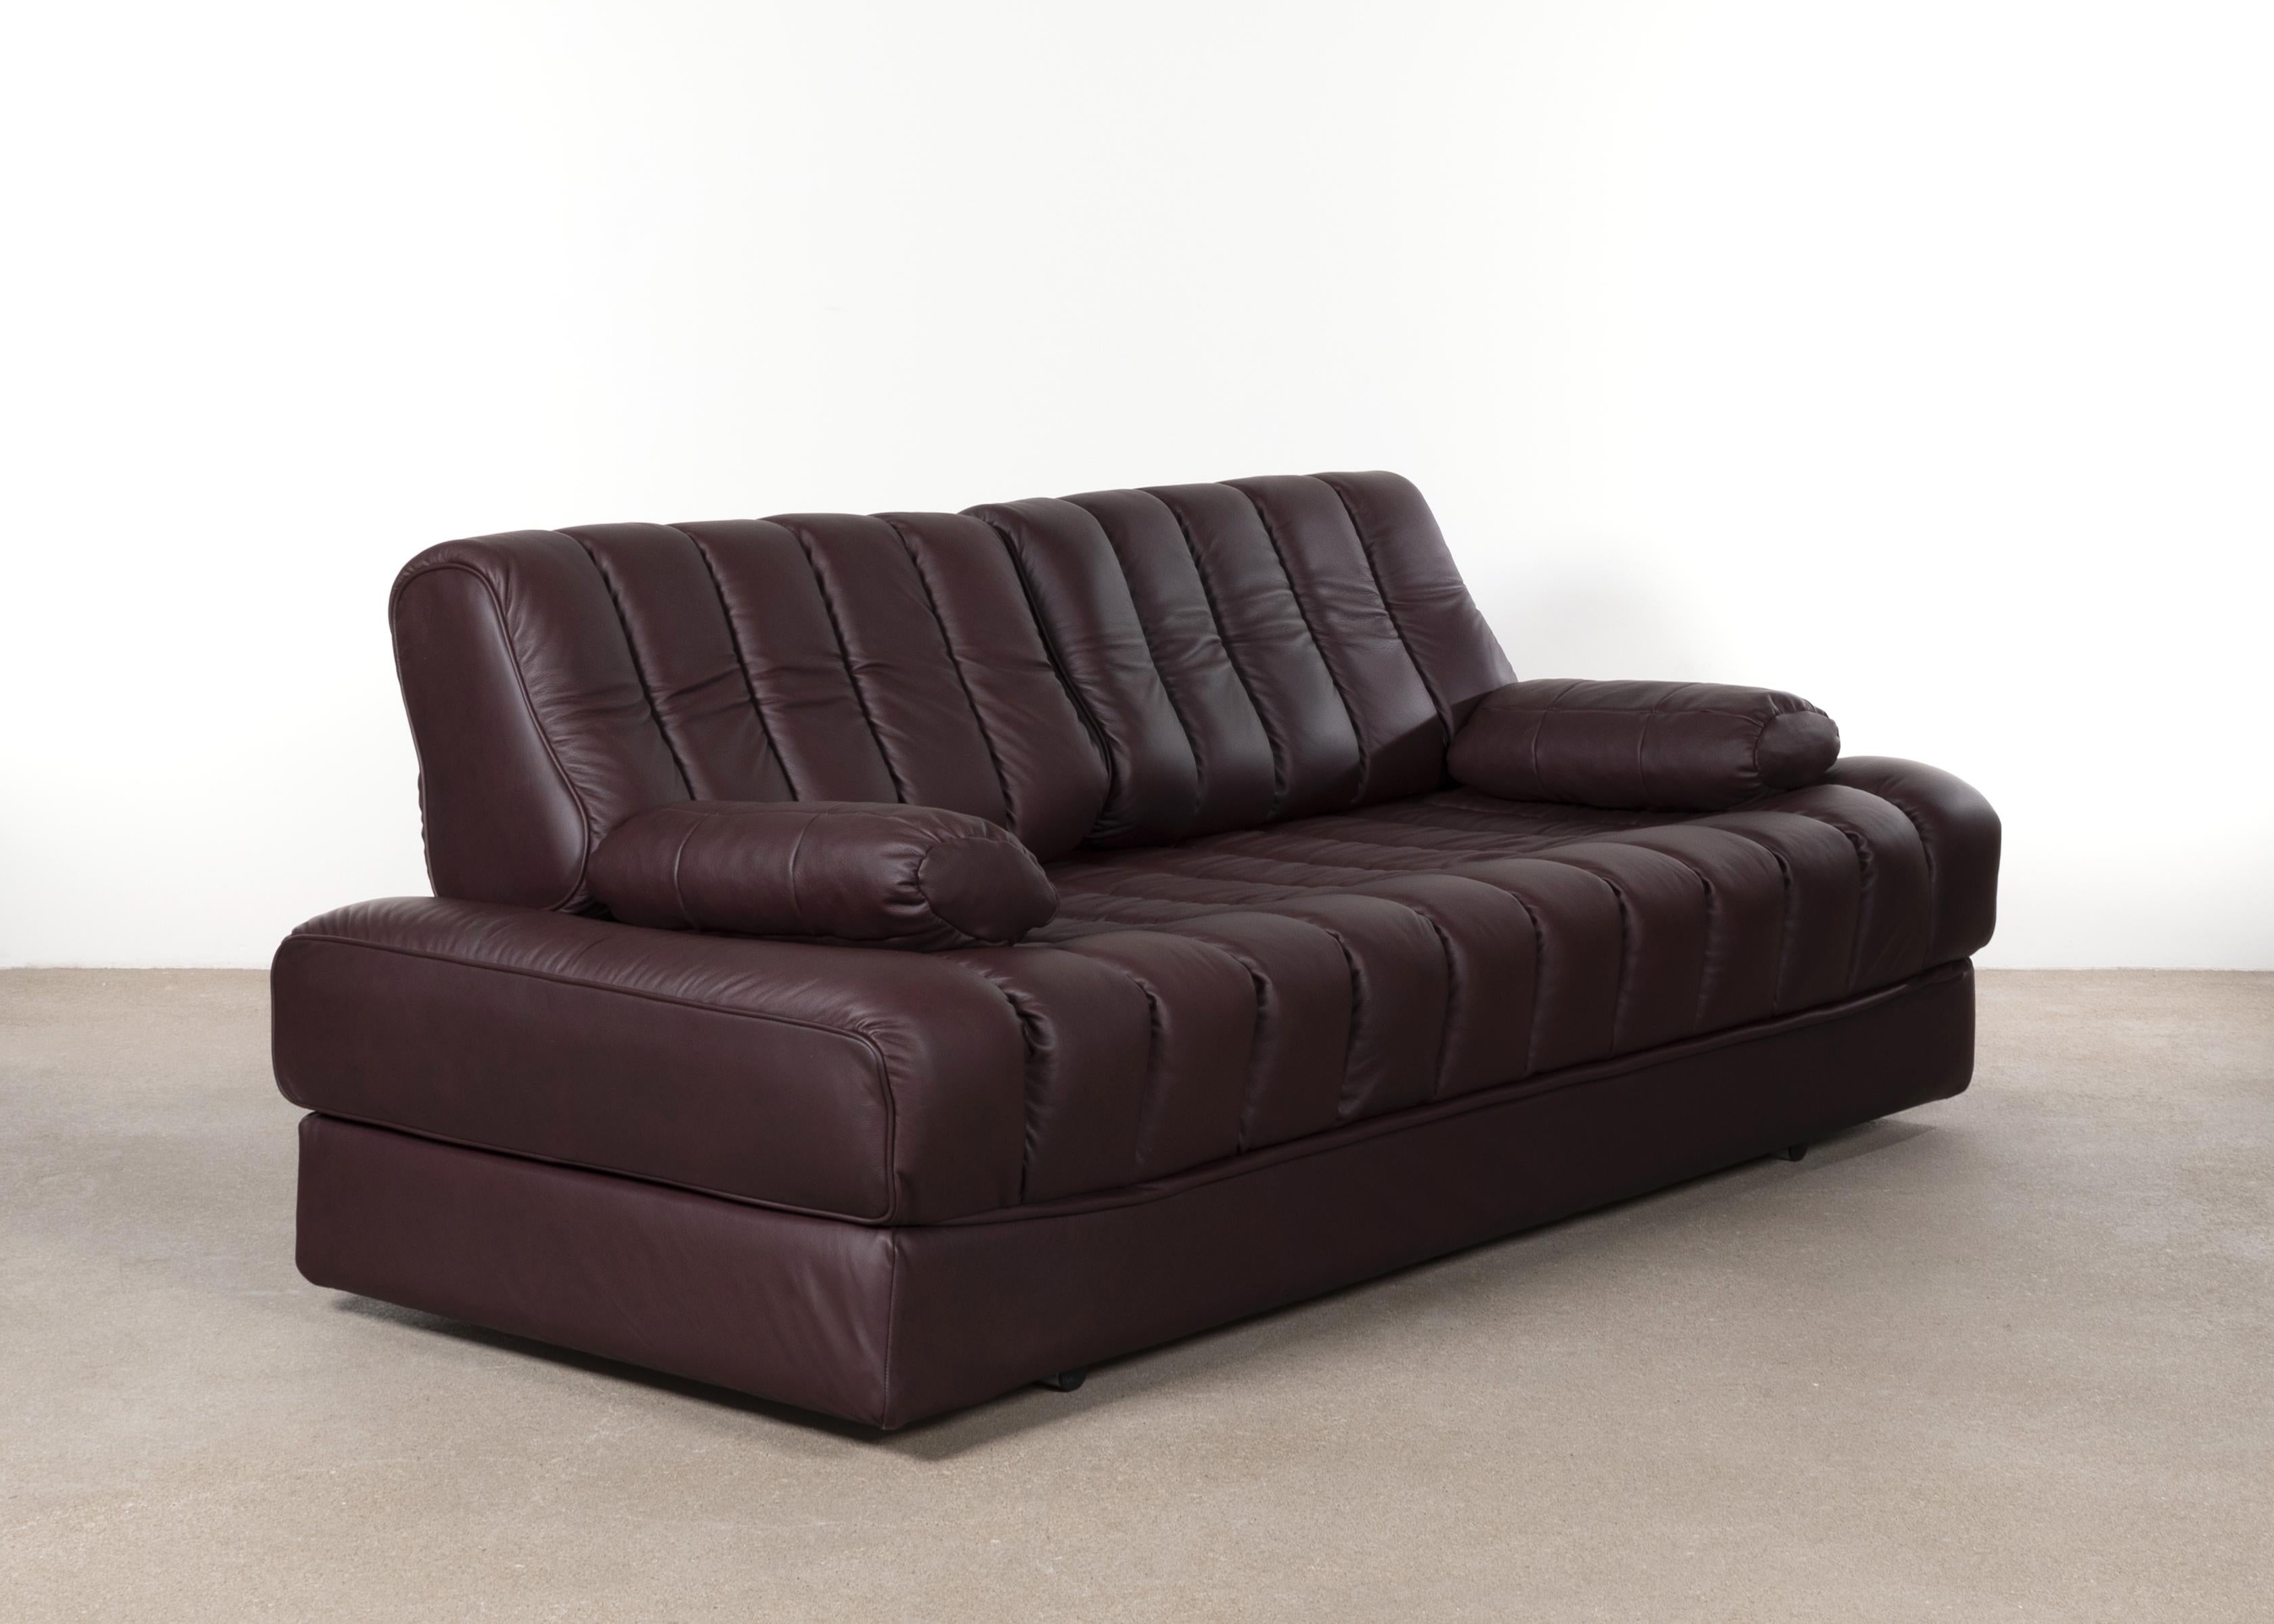 Comfortable and elegant sofa, daybed and loveseat from De Sede Switzerland 1975 DS 85. The sofa can easily turned into a double bed. The sofa is newly upholstered with very soft analine leather in the colour aubergine / brown. All in very good /